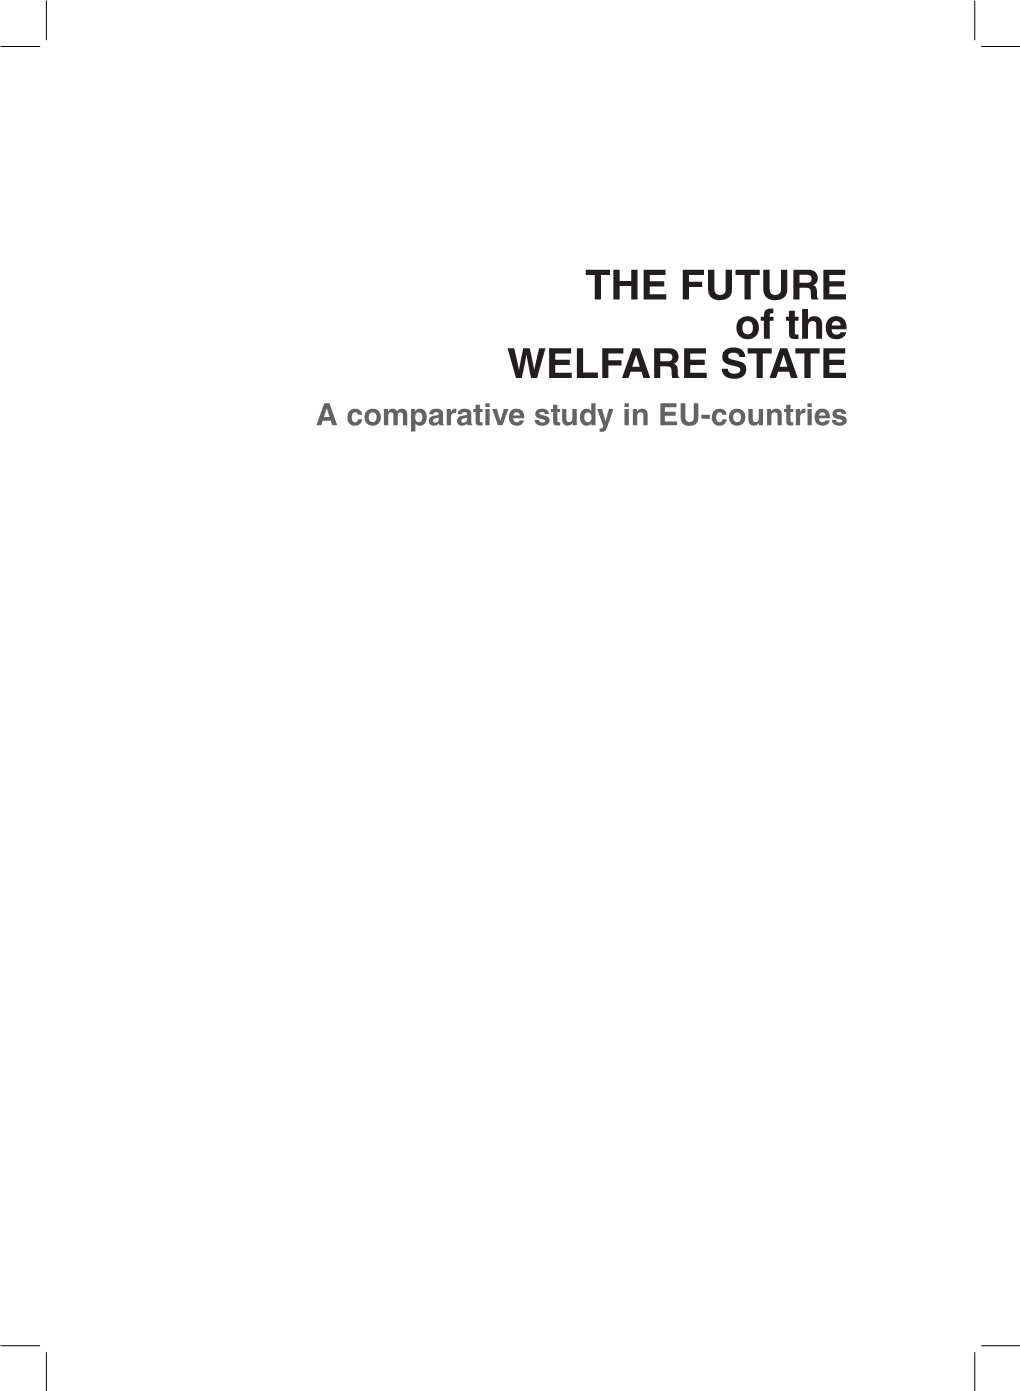 THE FUTURE of the WELFARE STATE